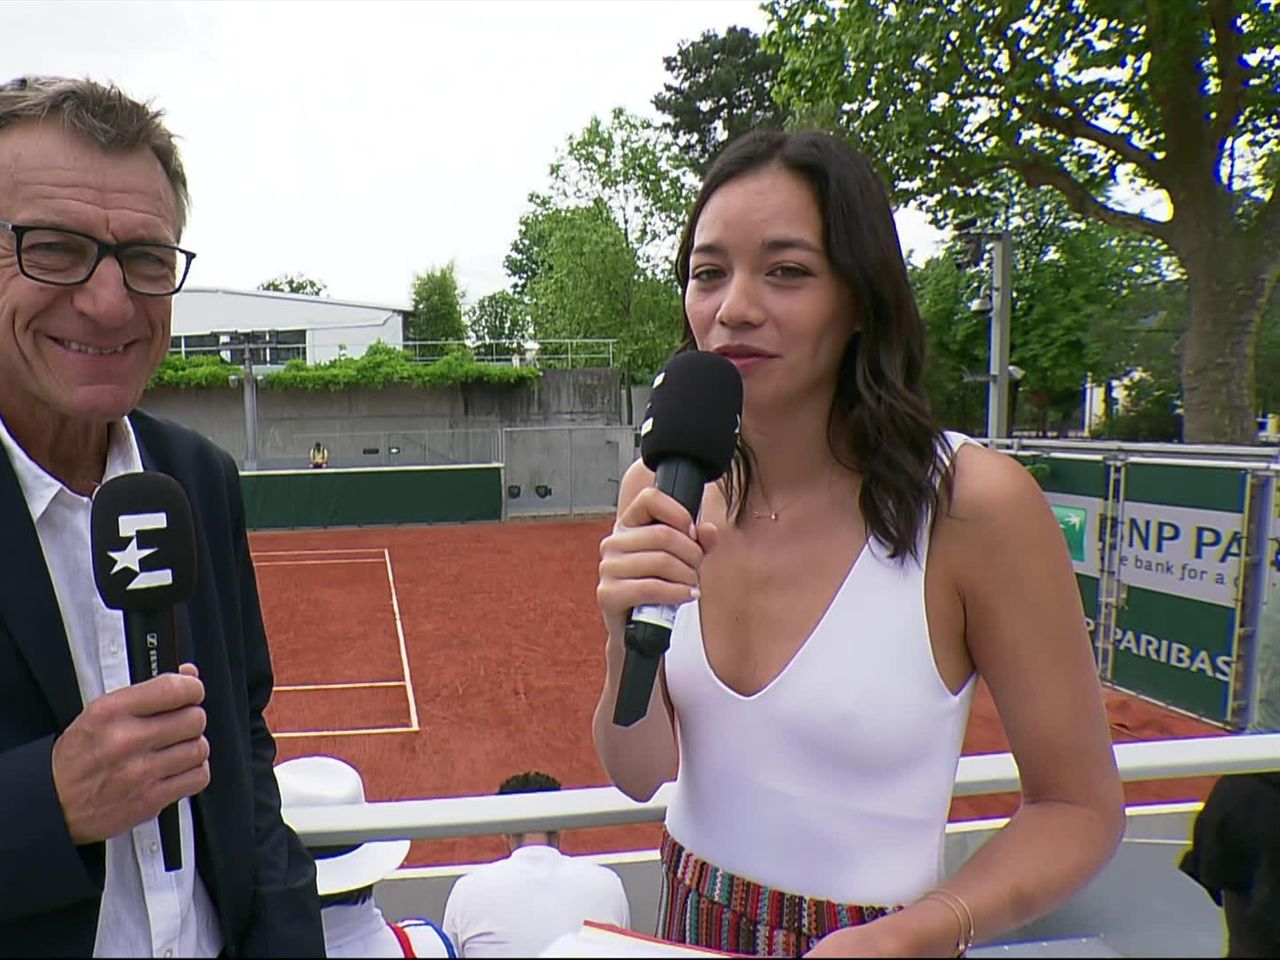 Hes not afraid of anything or anybody - Mats Wilander on why Carlos Alcaraz is so special at French Open - Tennis video